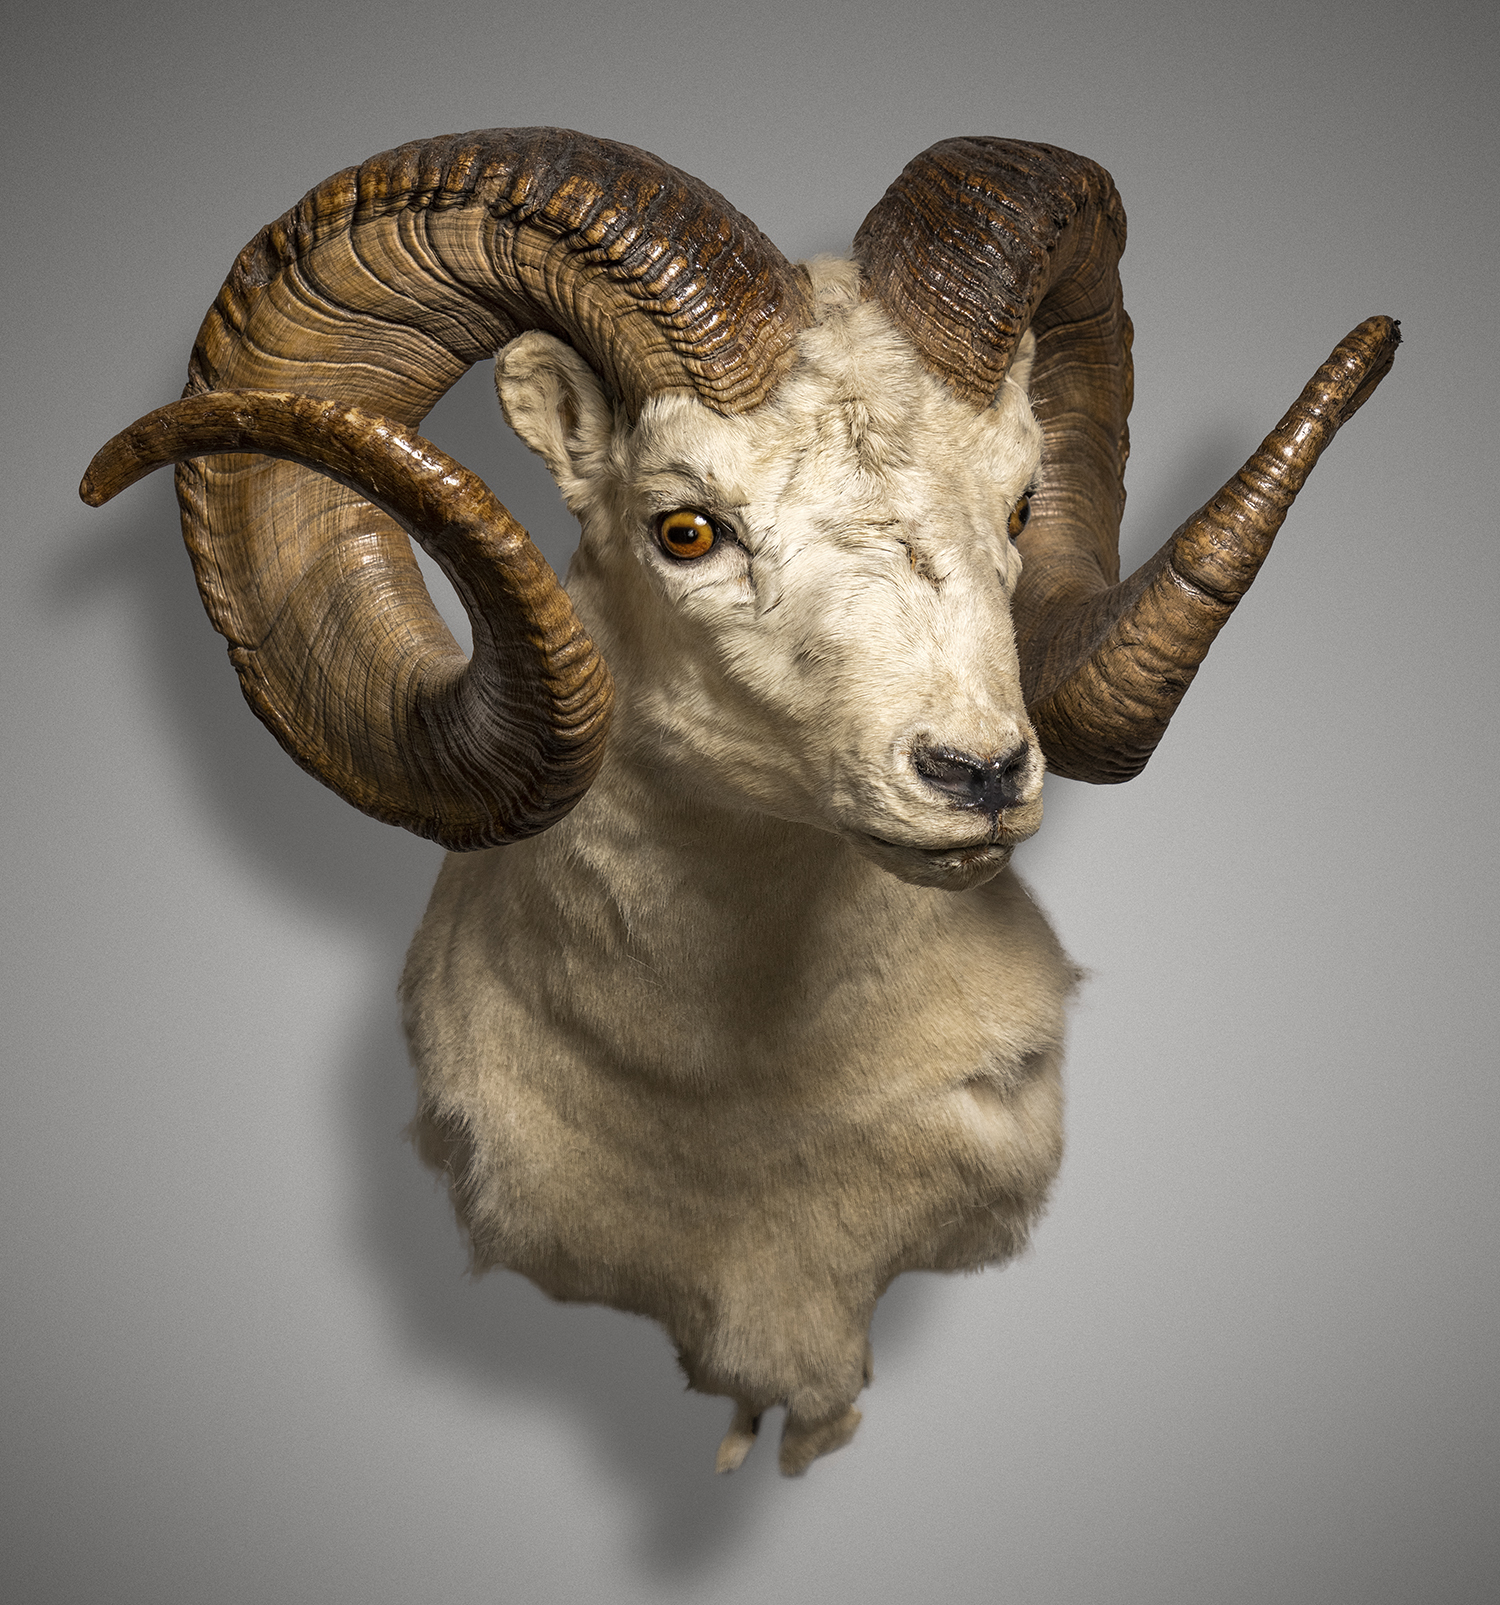 A member of the Boone and Crockett club collected this Dall sheep.